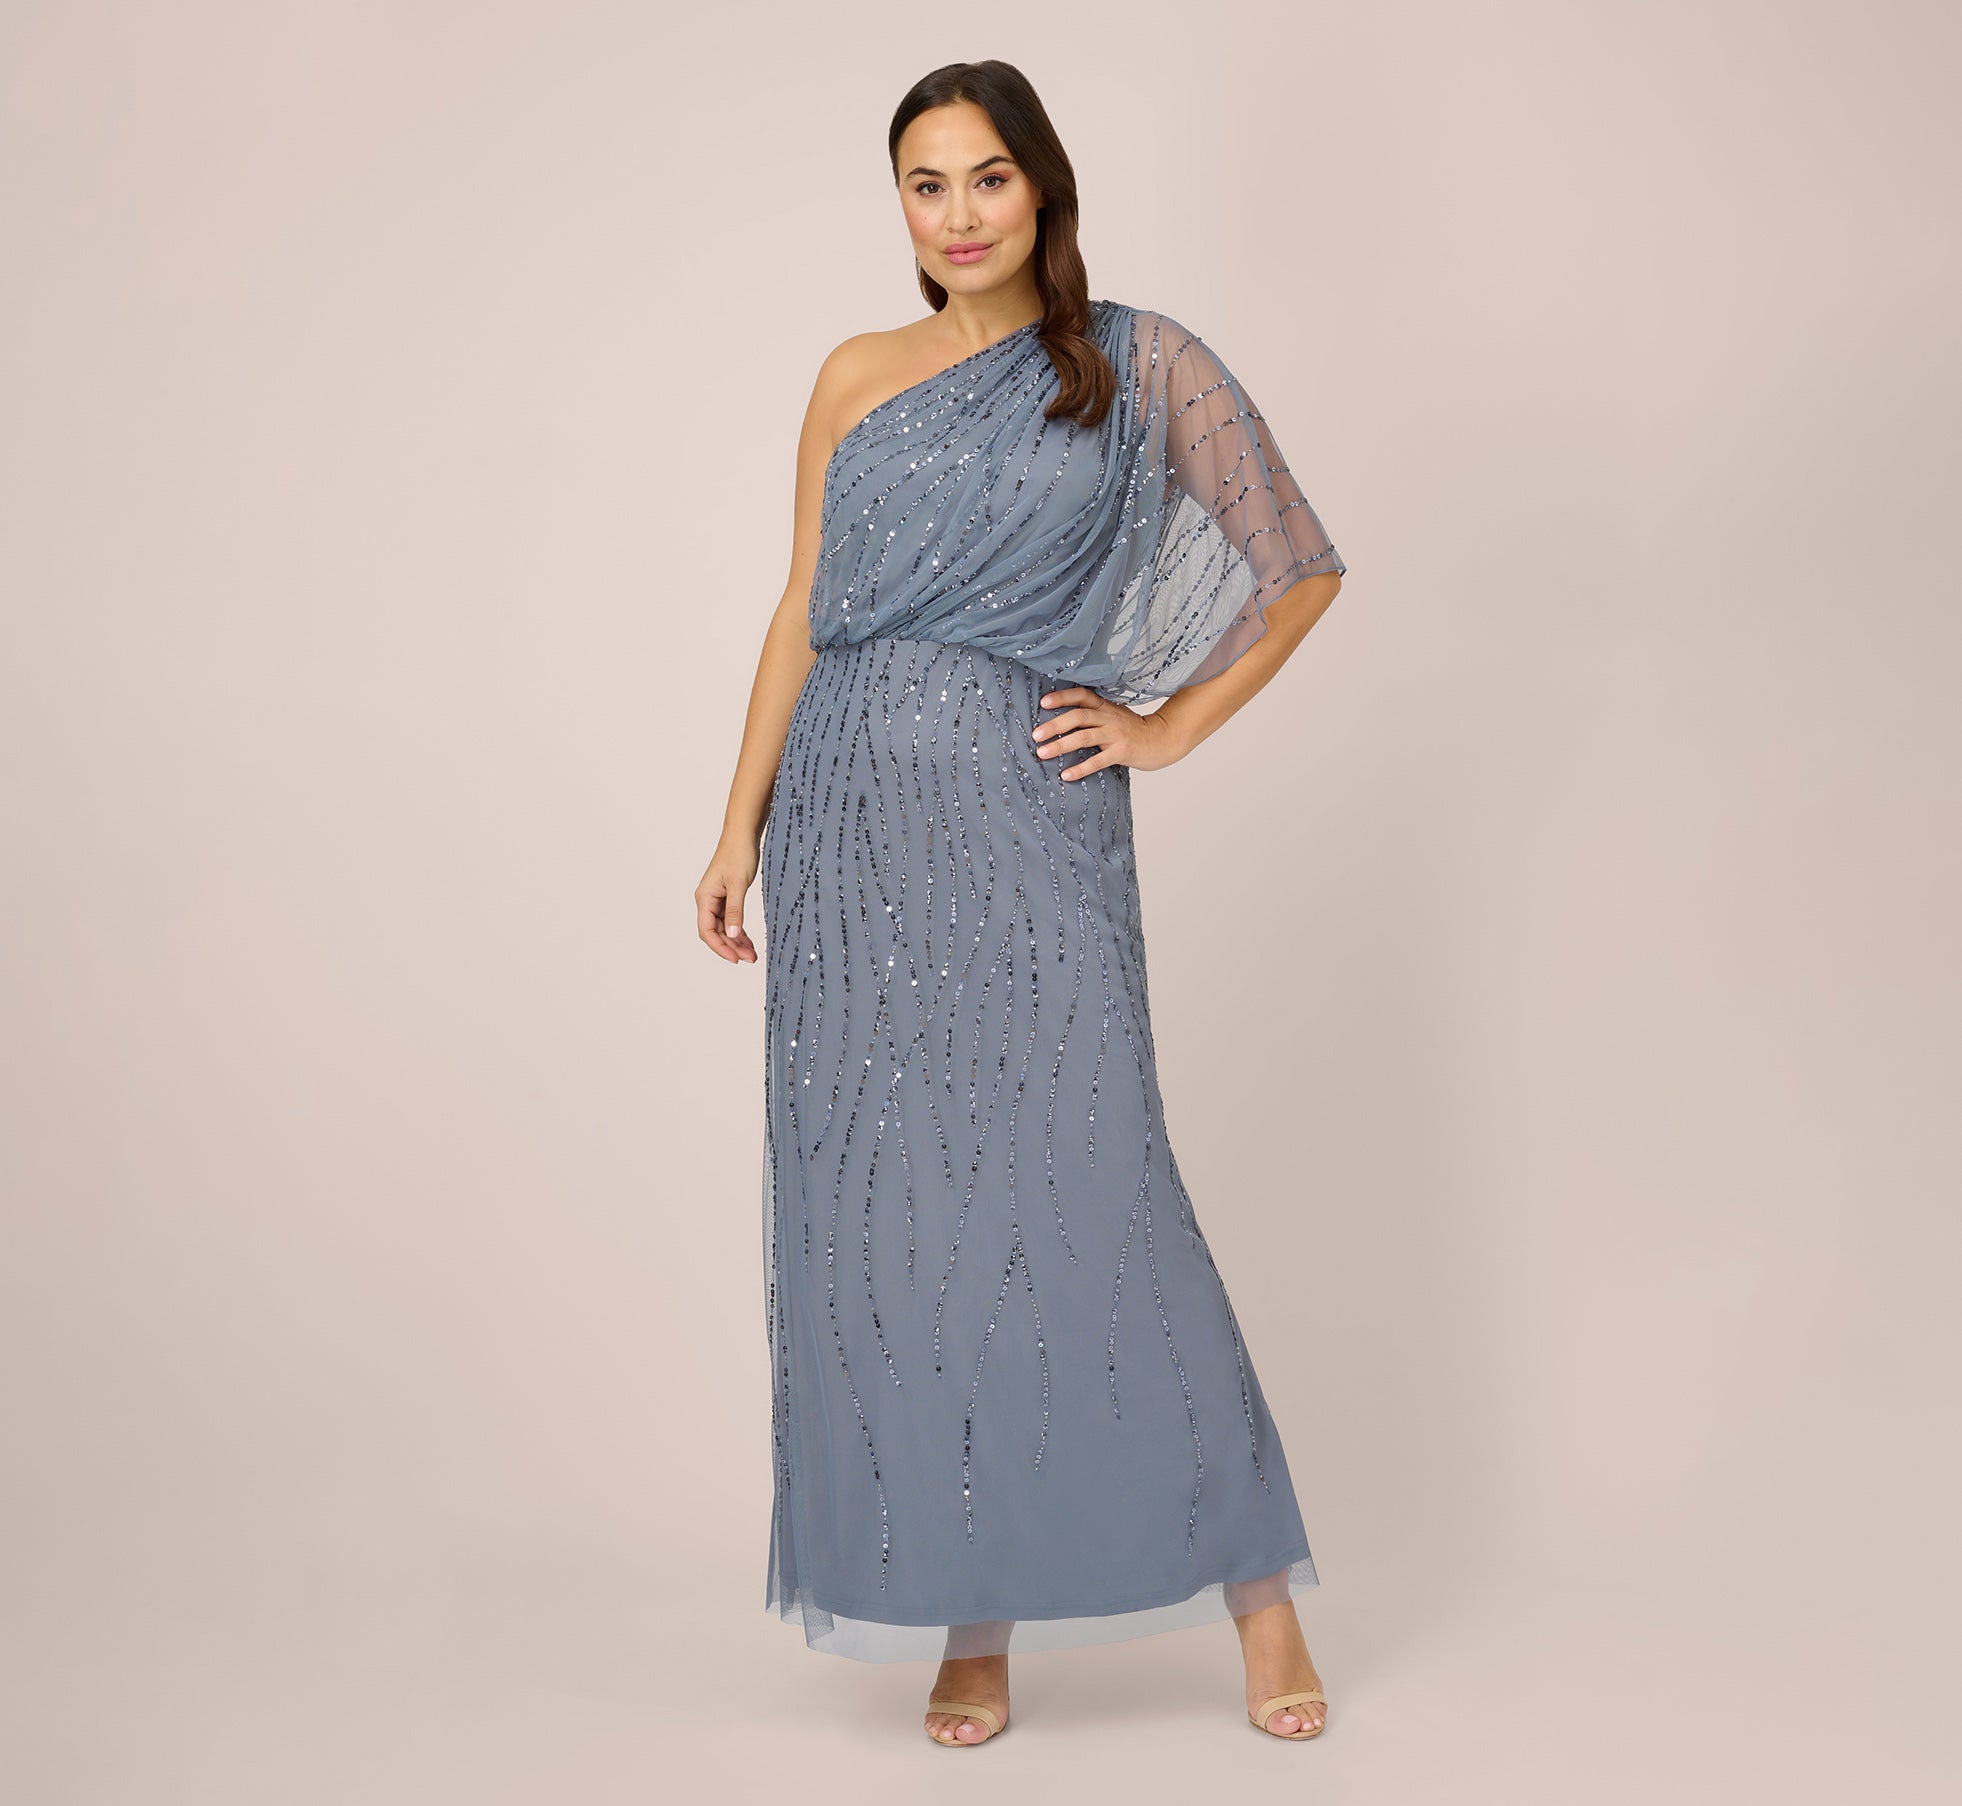 adrianna papell plus size dresses